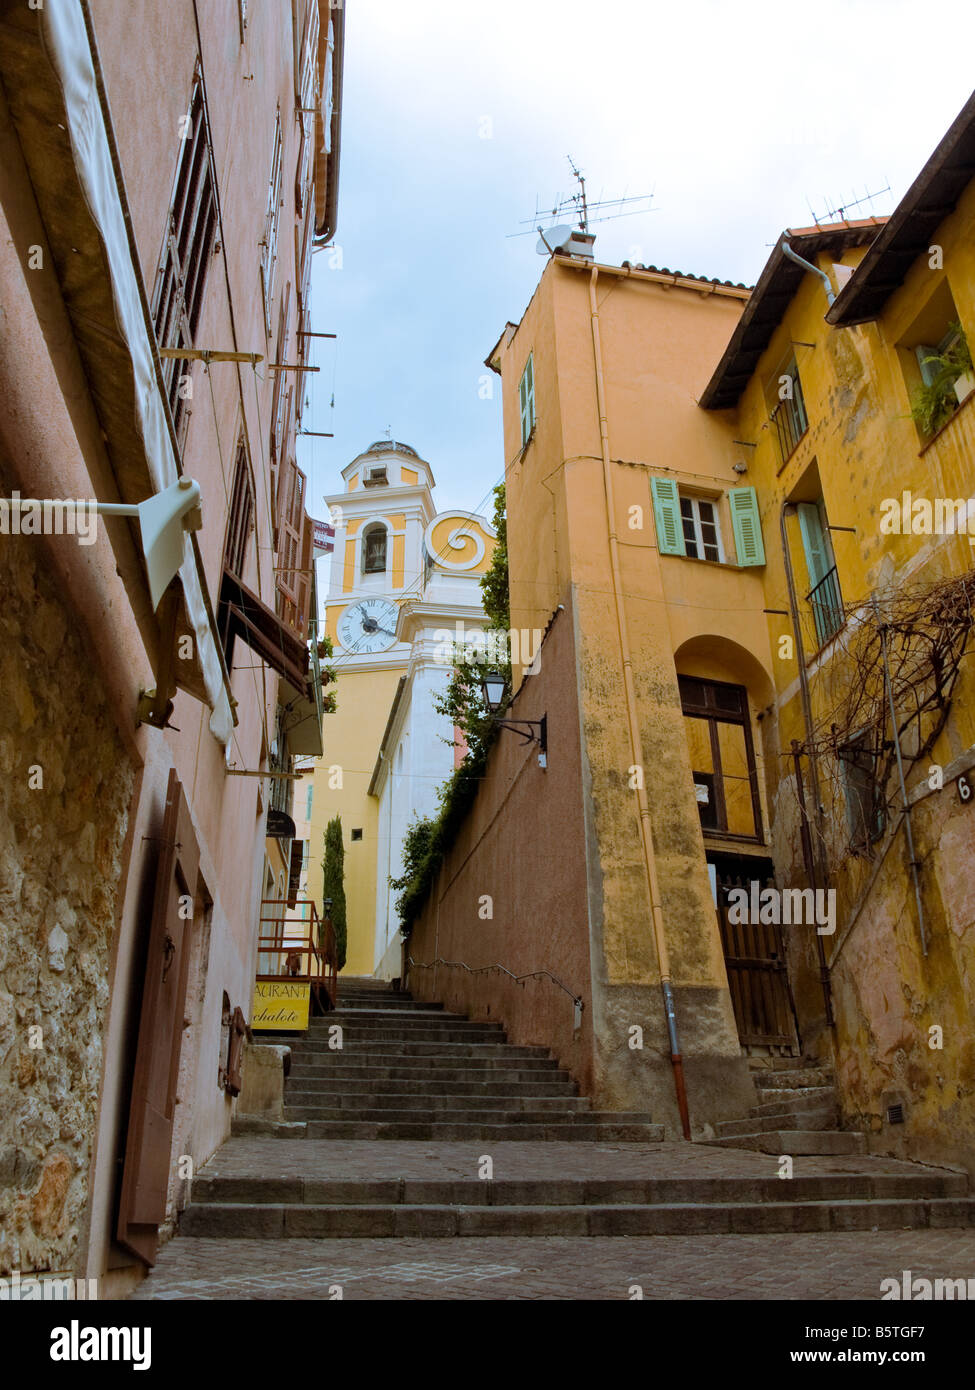 A narrow, steep street in Villefranche-sur-Mer, France. Stock Photo